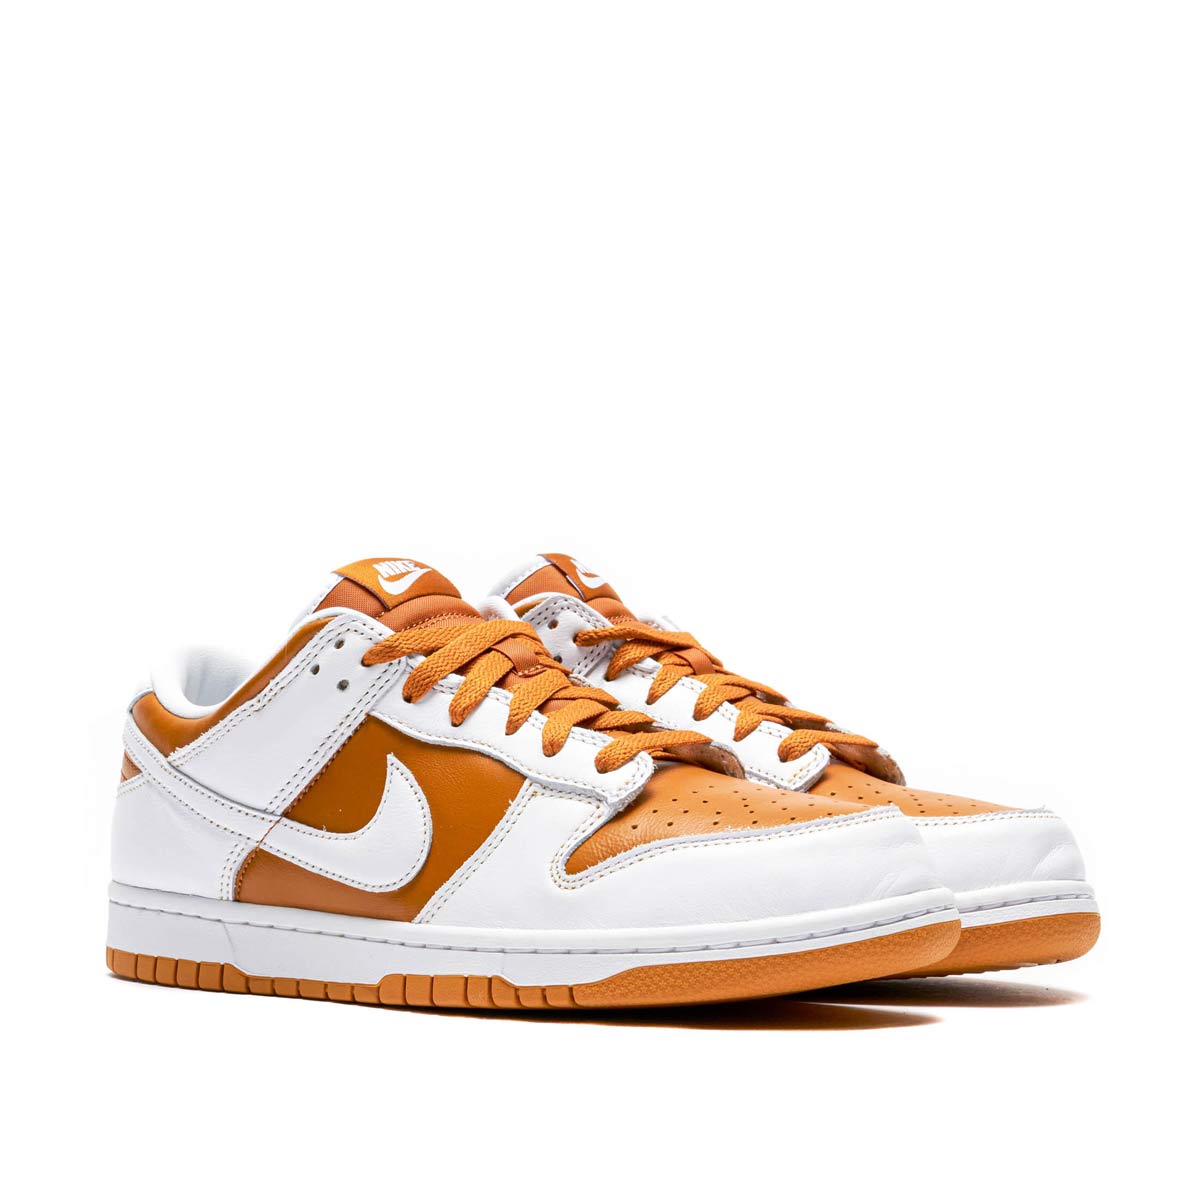 Dunk Low Qs "Rev. Curry"